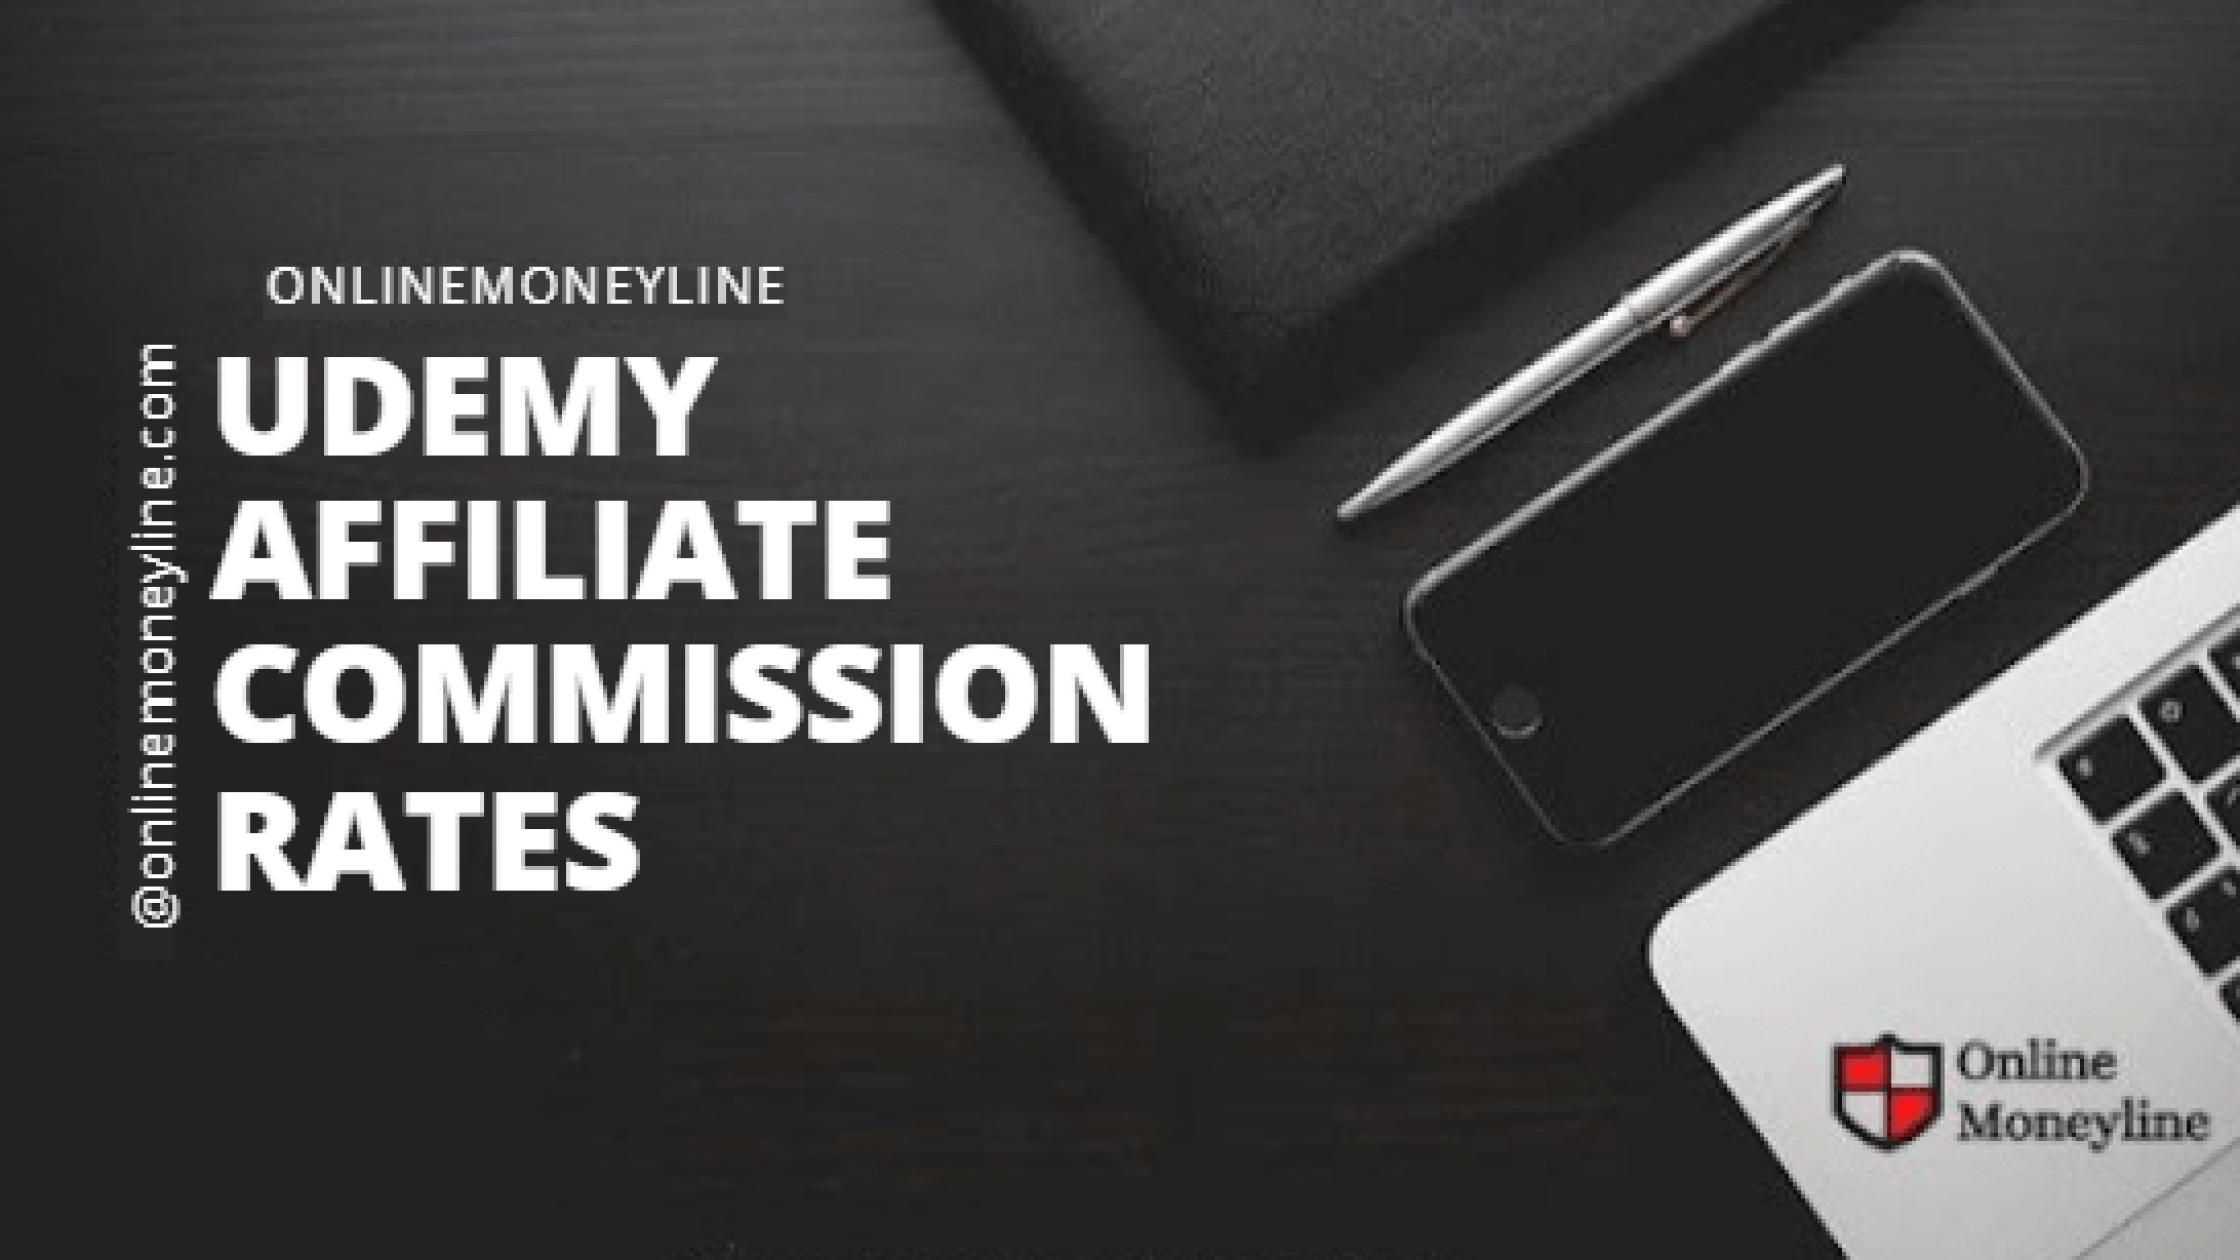 Udemy Affiliate Commission Rates